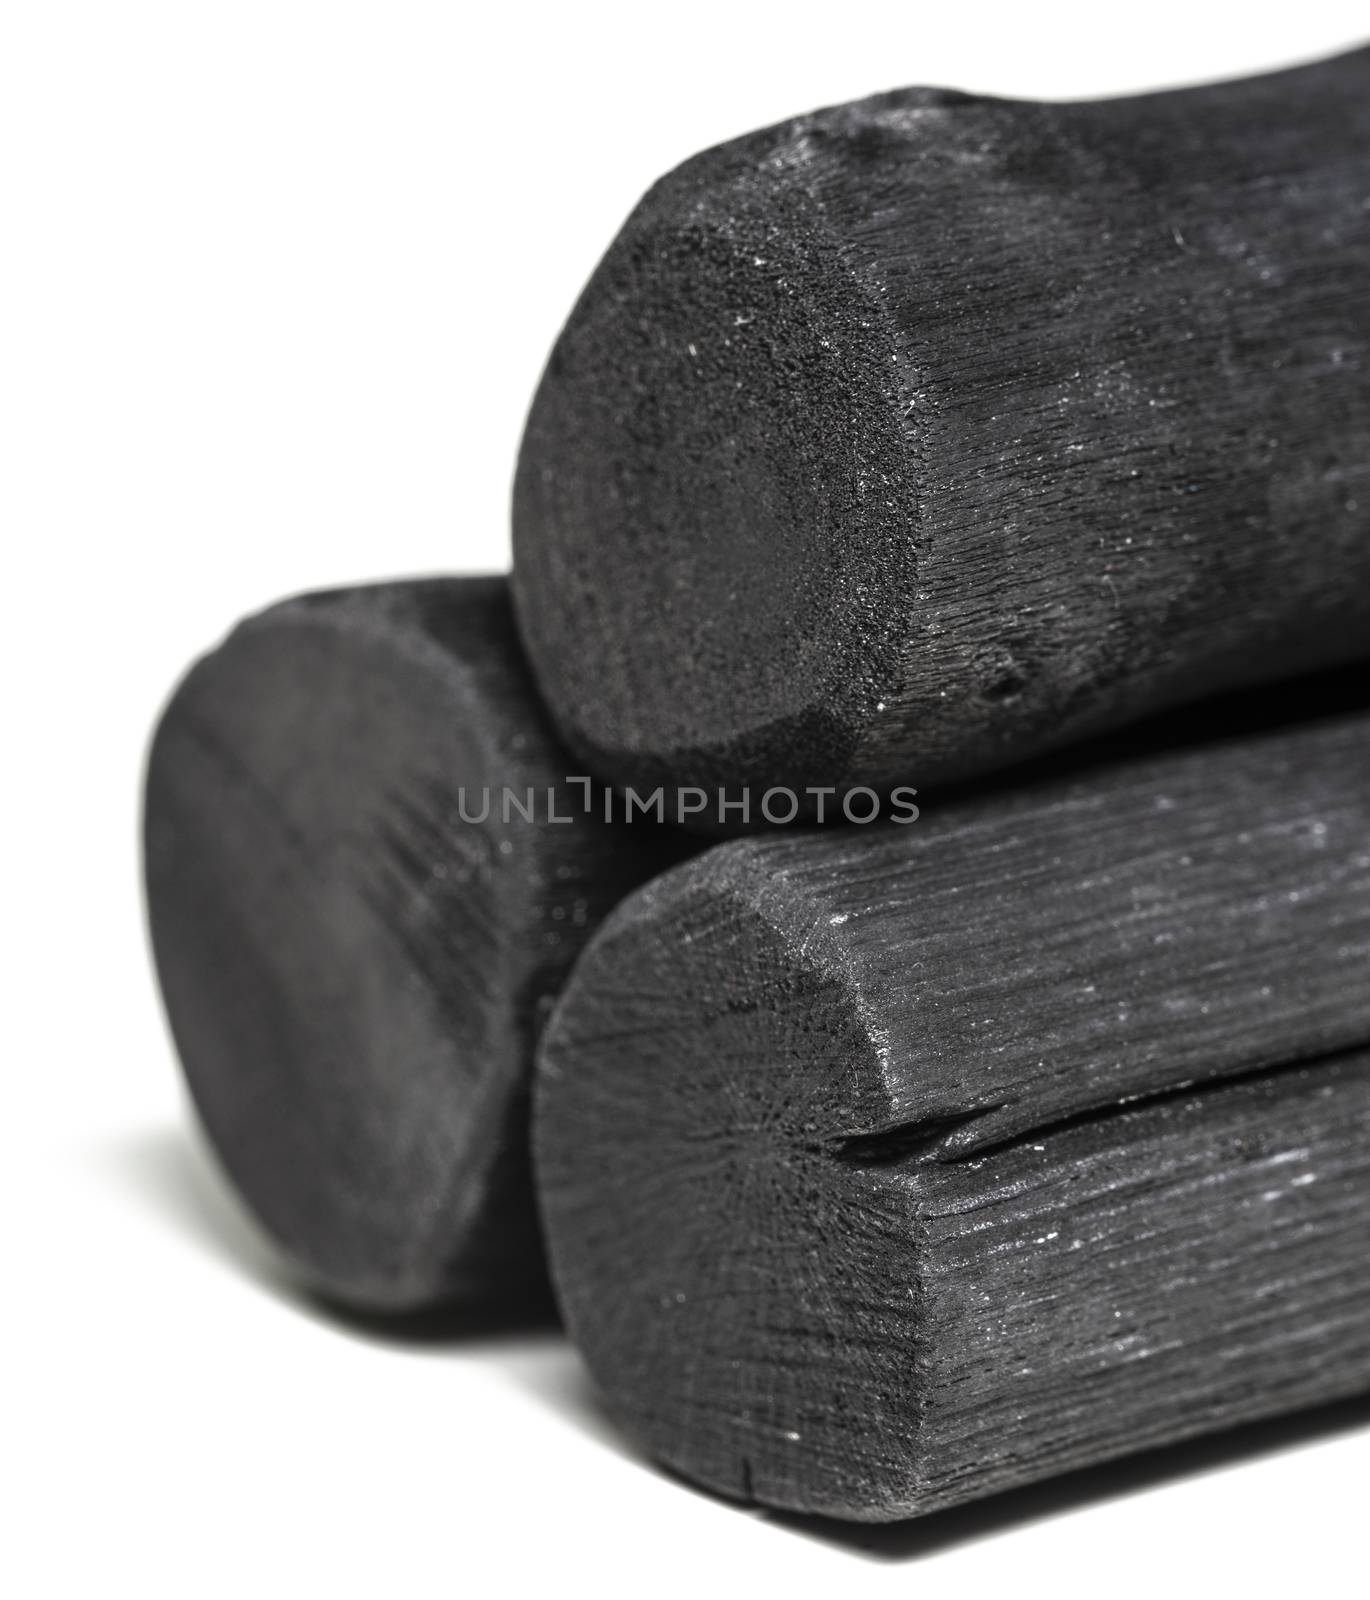 Binchotan Charcoal Stick Over White Background by Olivier-Le-Moal